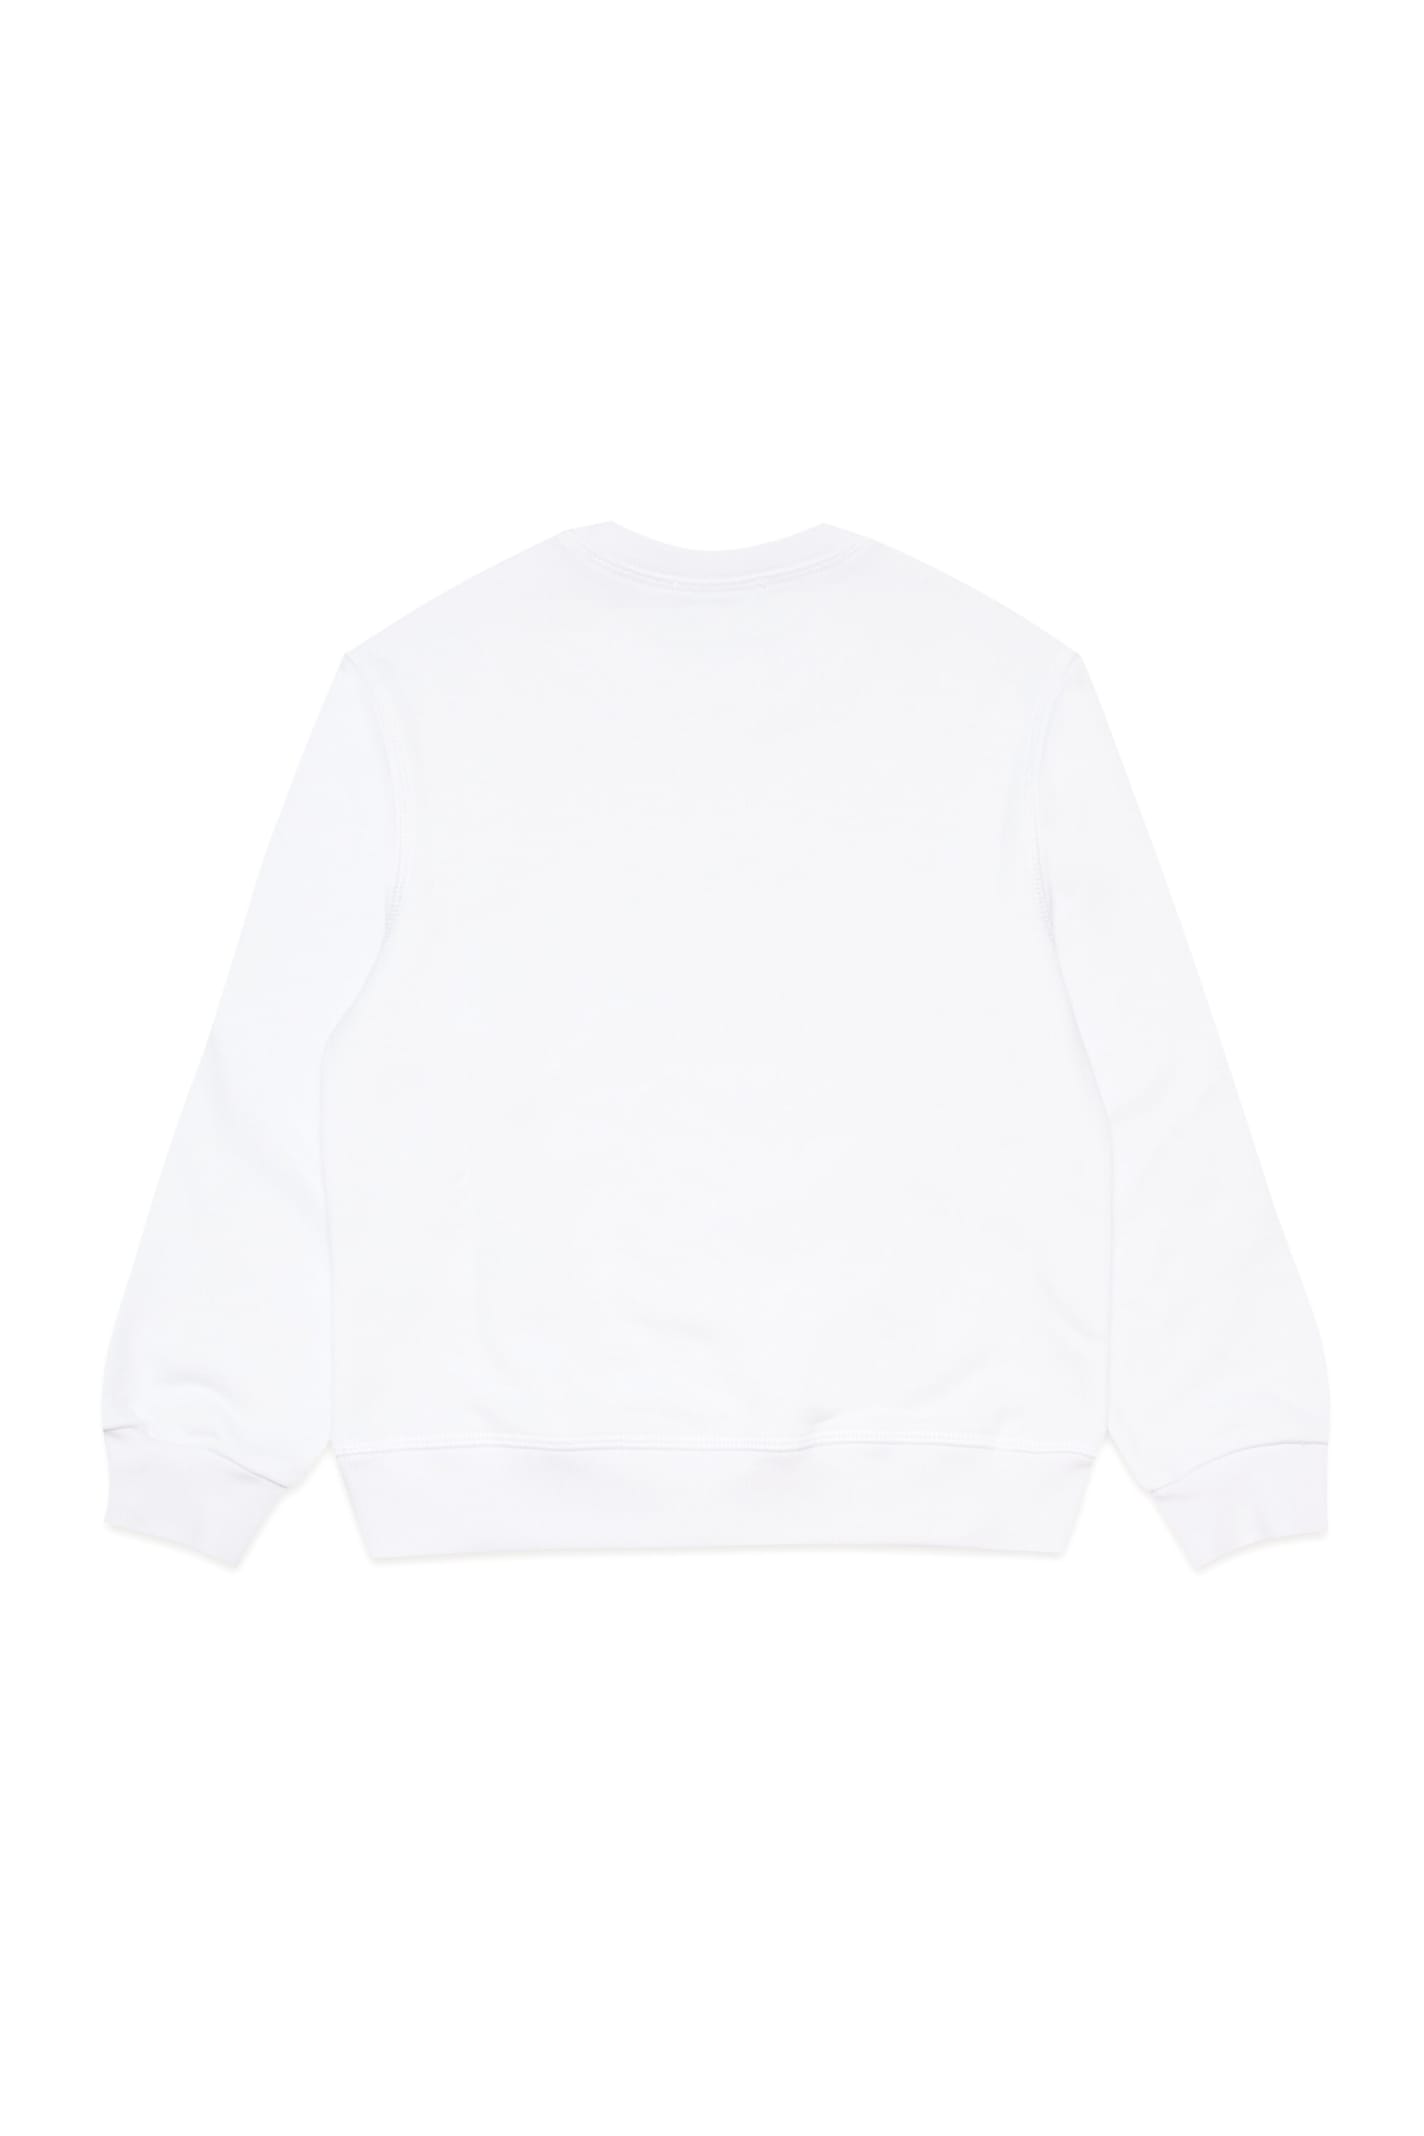 Shop Dsquared2 D2s718u Relax Sweat-shirt Dsquared Crew-neck, Long-sleeved, Cotton Sweatshirt With Elastic On Neck,  In Bianco